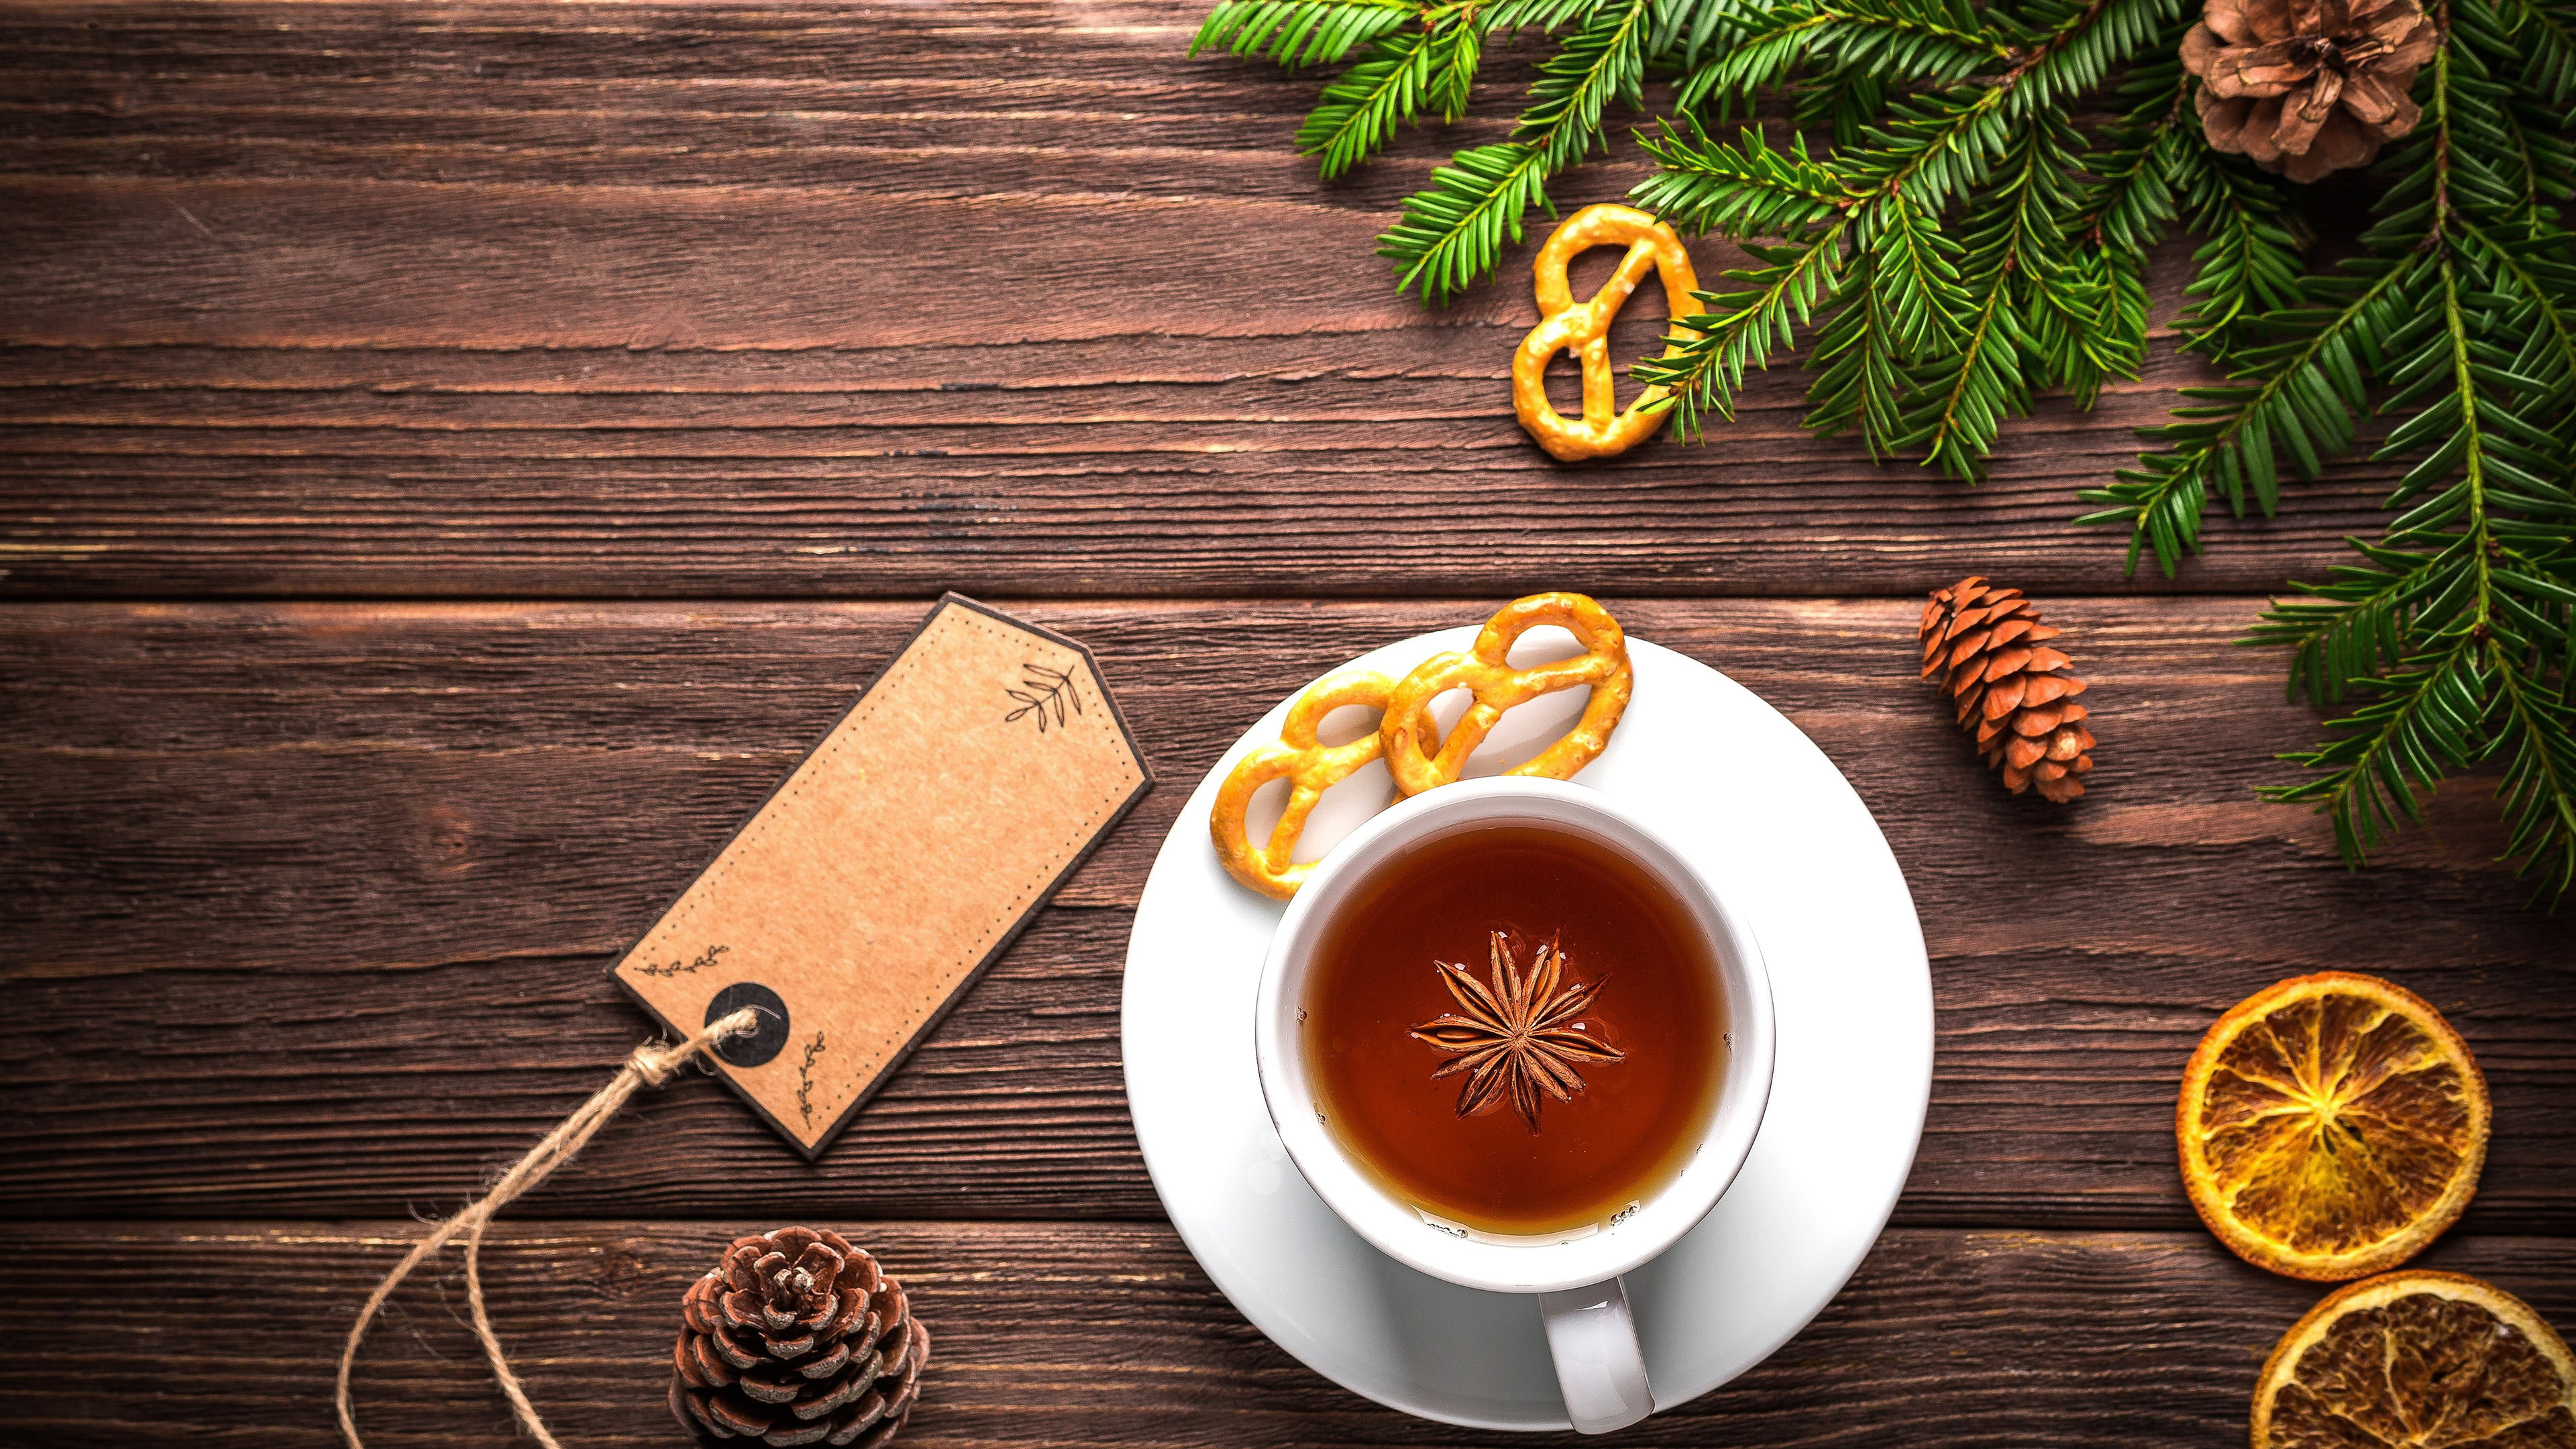 Tea: Hot winter drink, a great soothing agent for a sore throat. 3840x2160 4K Wallpaper.